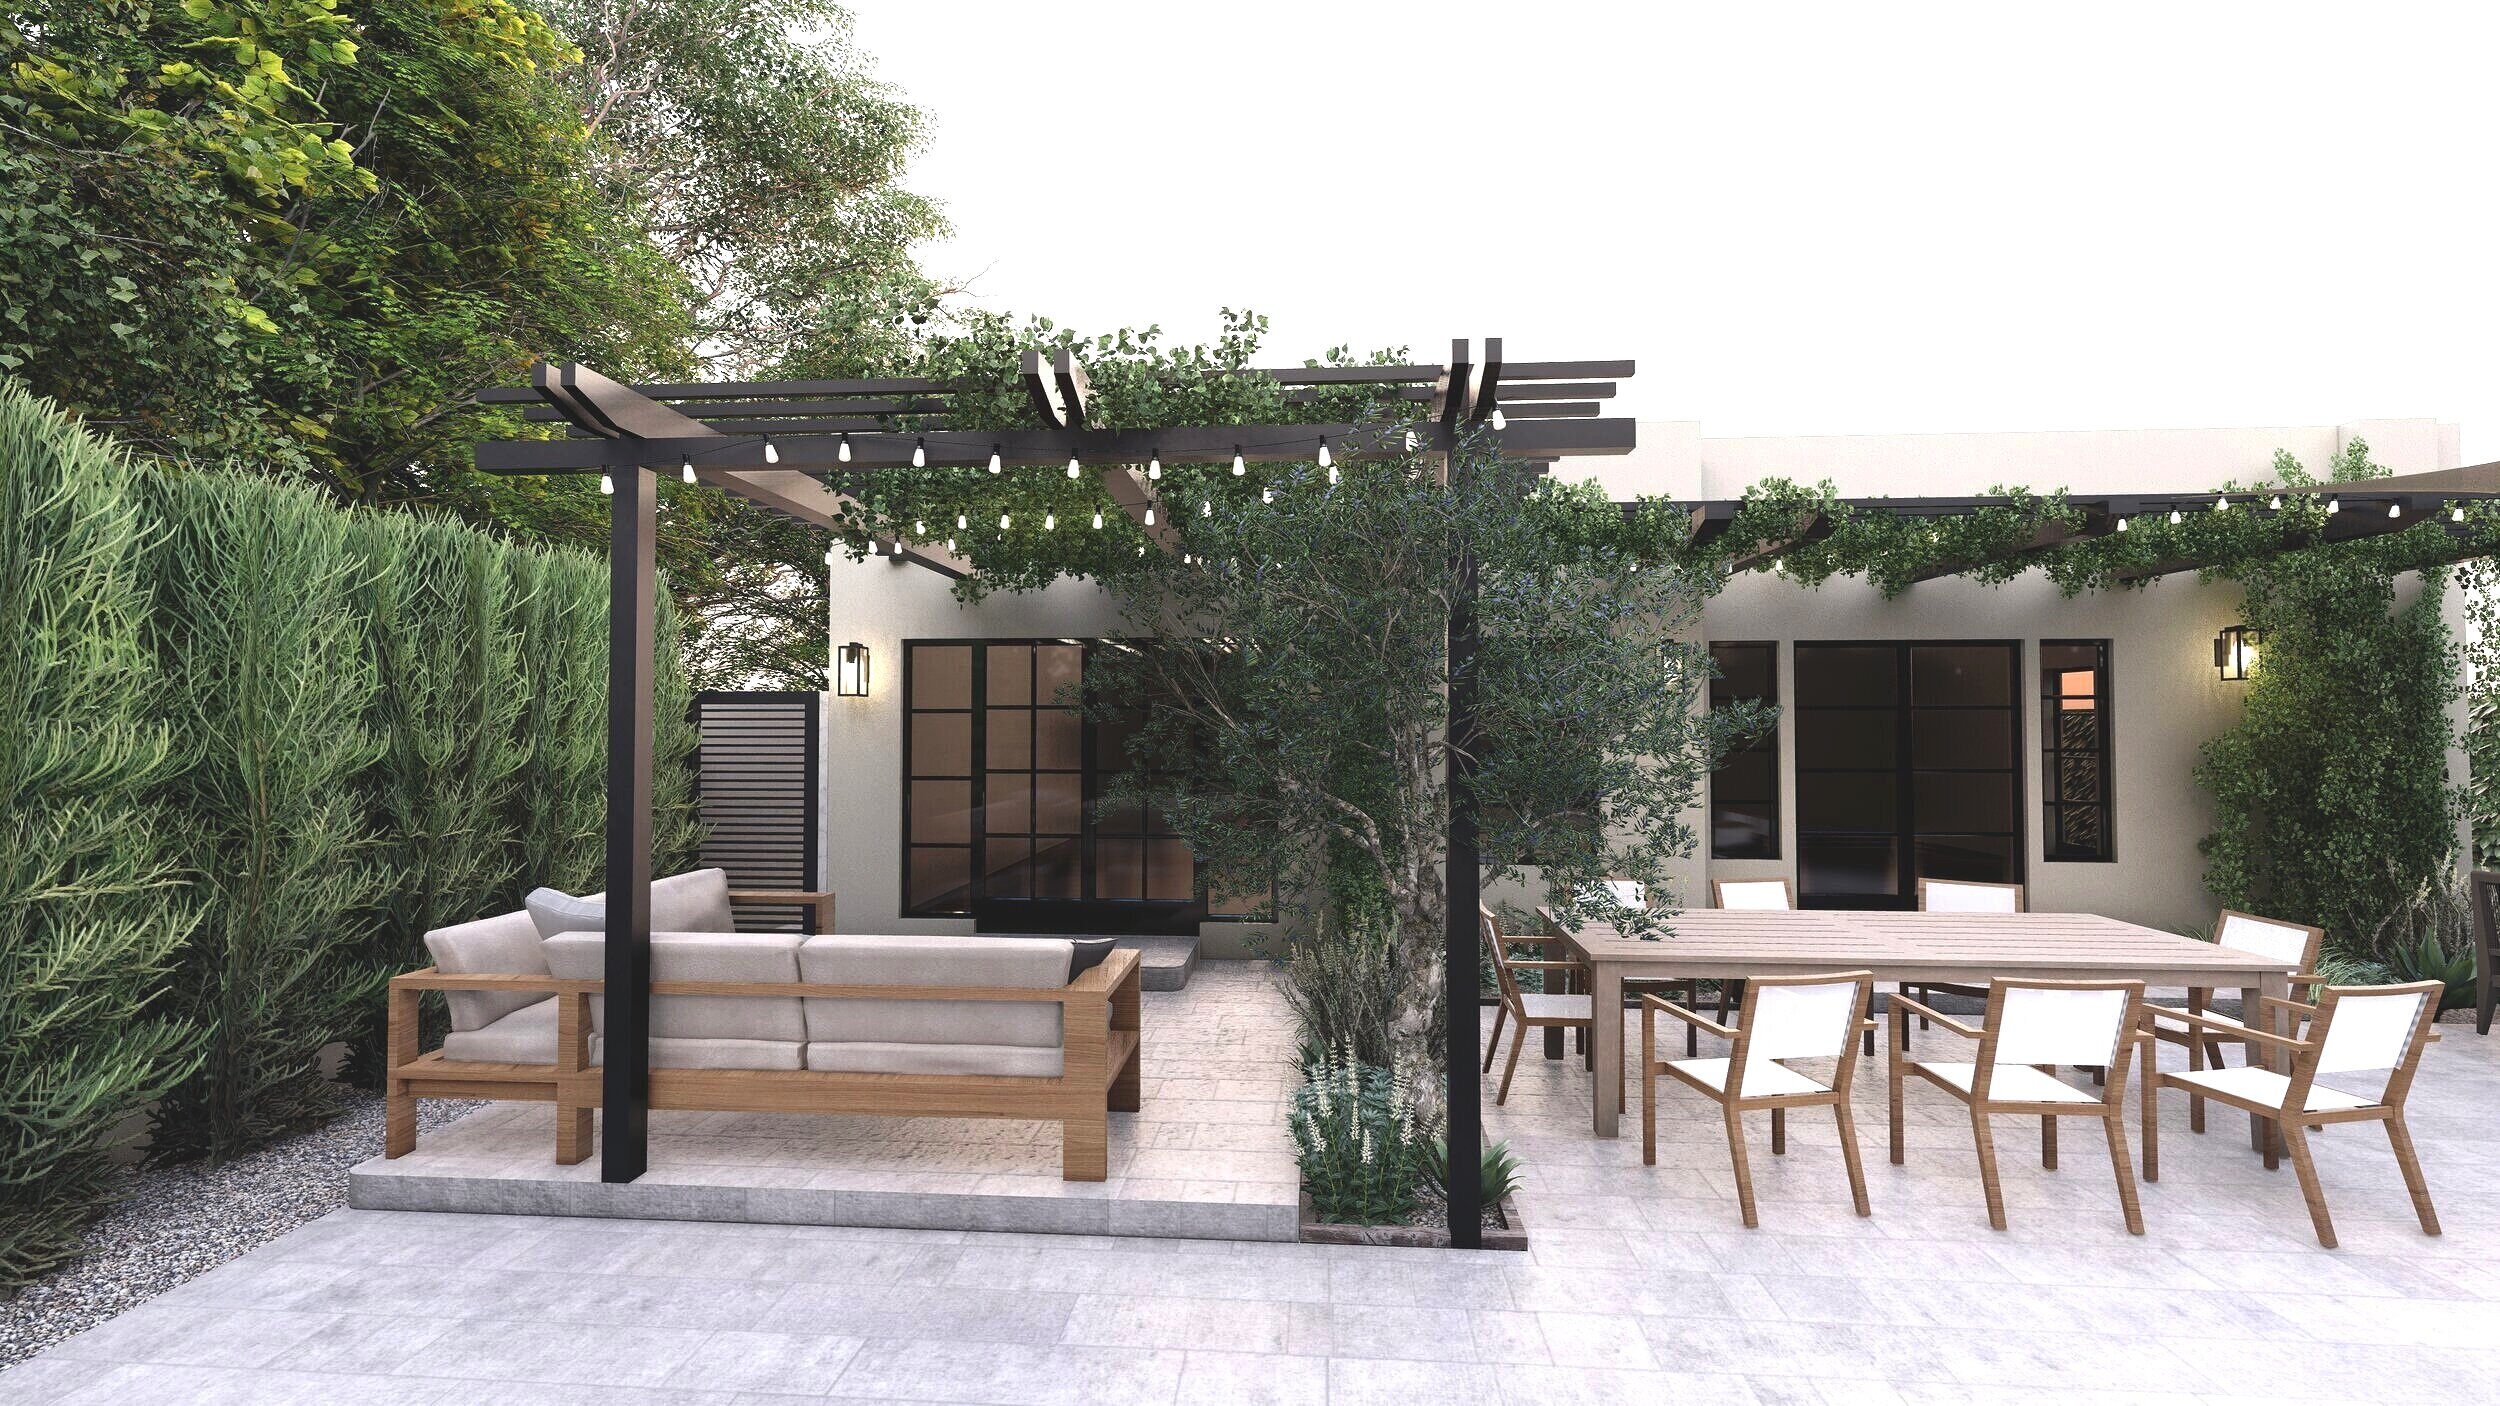 Concrete-floored yard, a pergola with lighting, outdoor sofa, outdoor dining and ornamental plants.